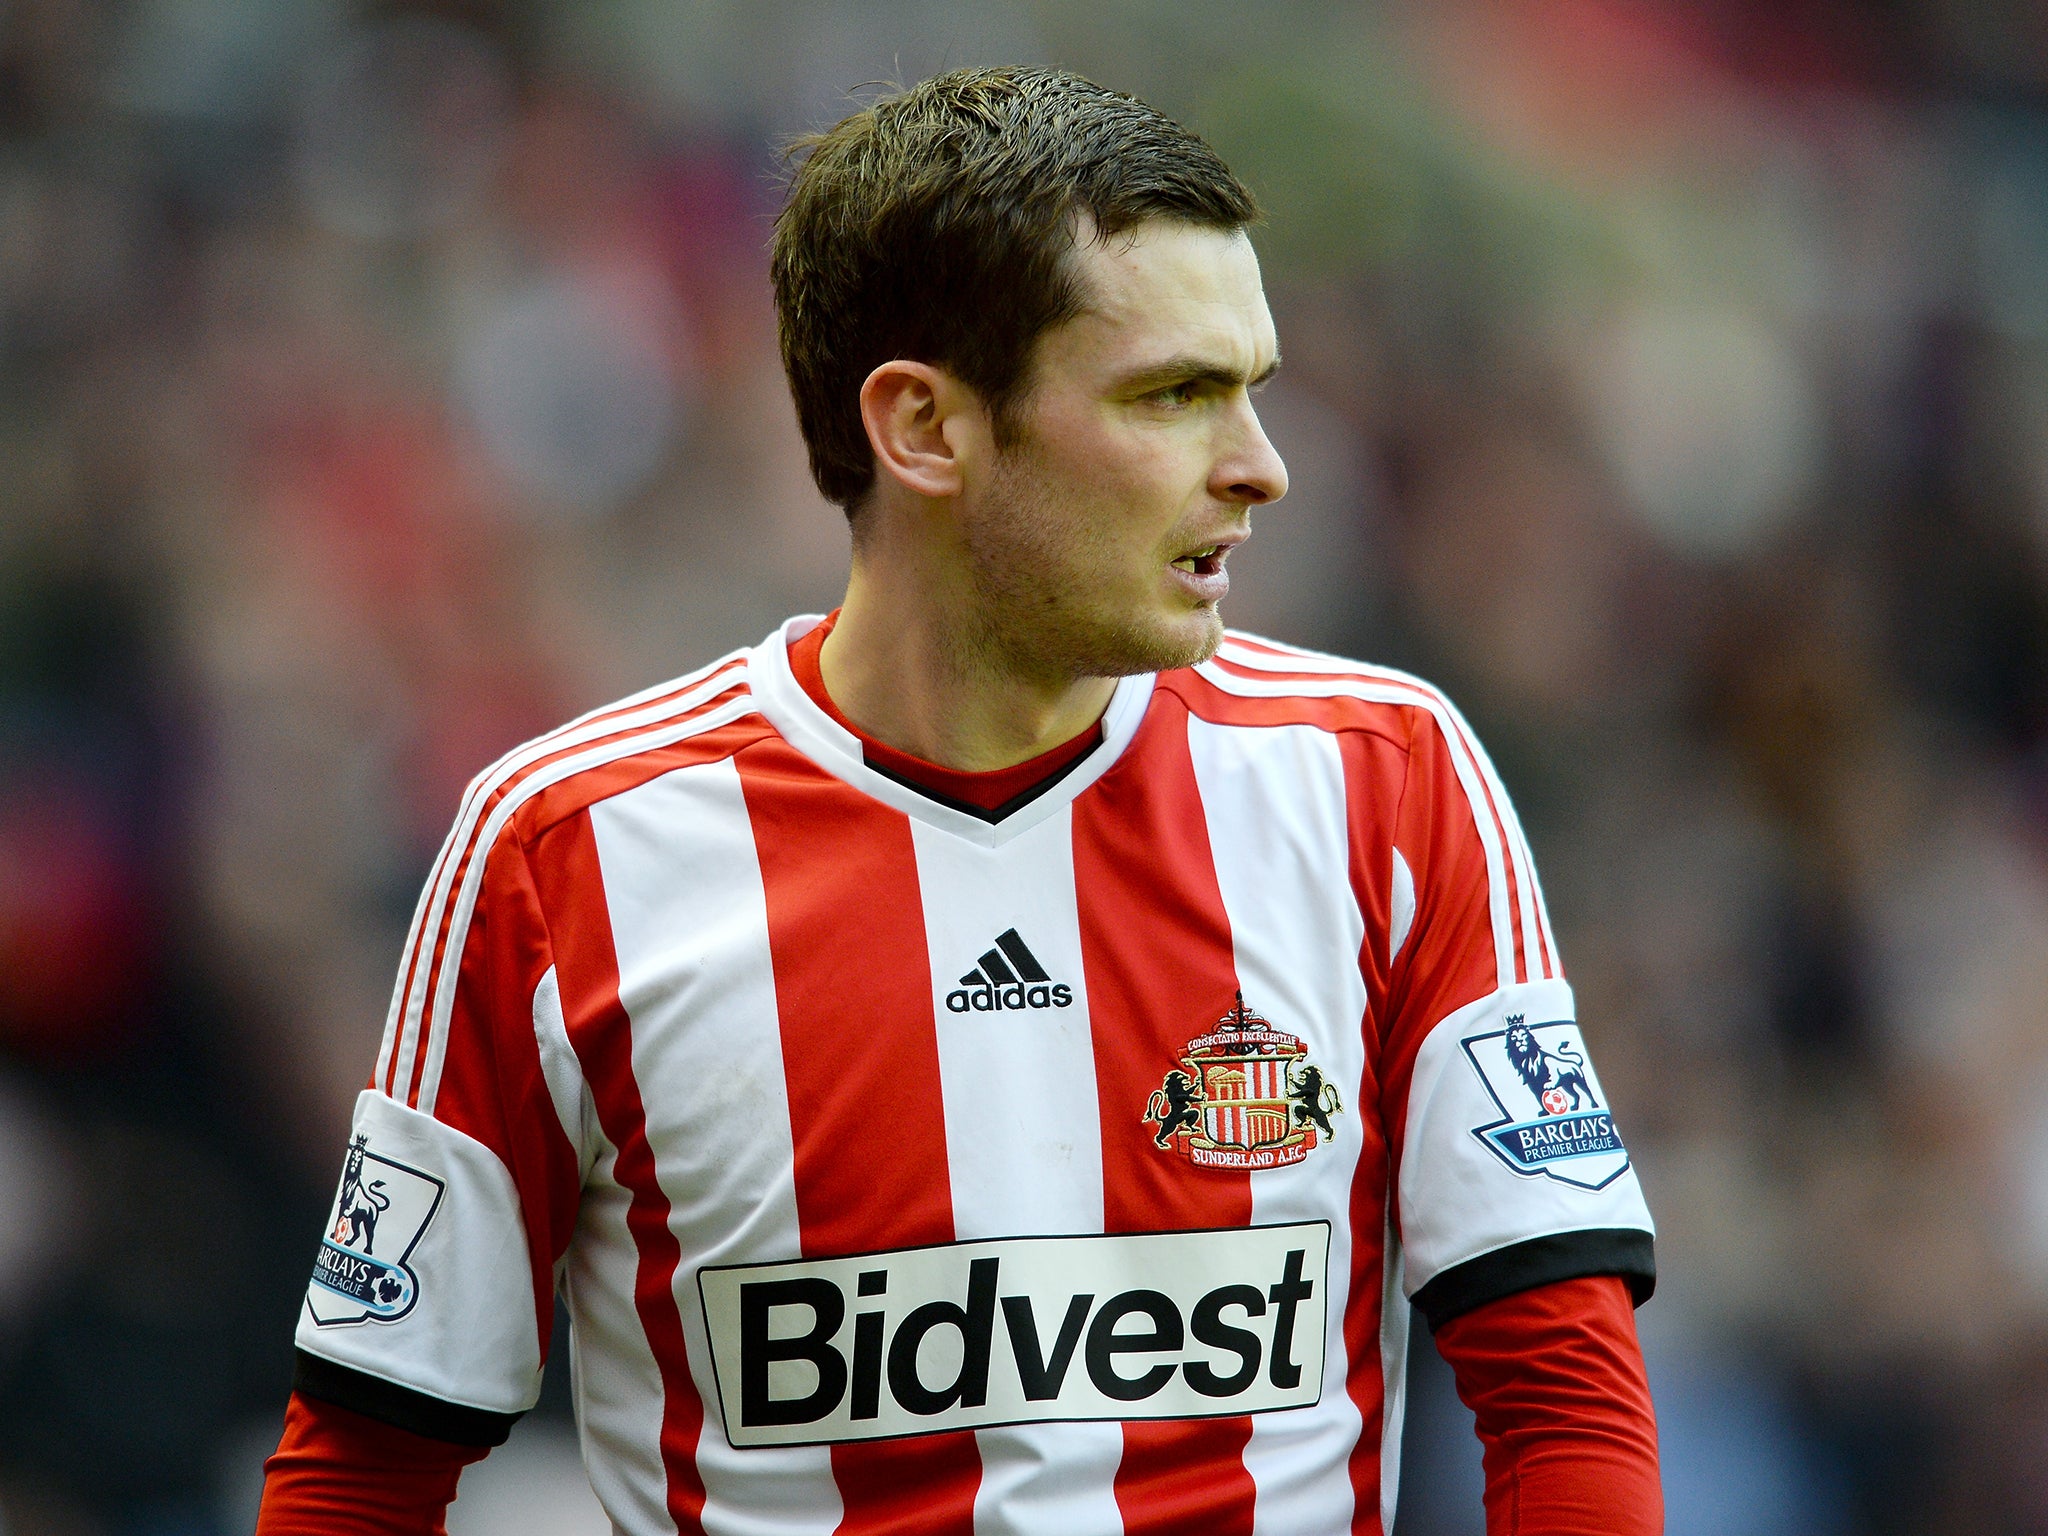 Adam Johnson has been suspended by his club, Sunderland 